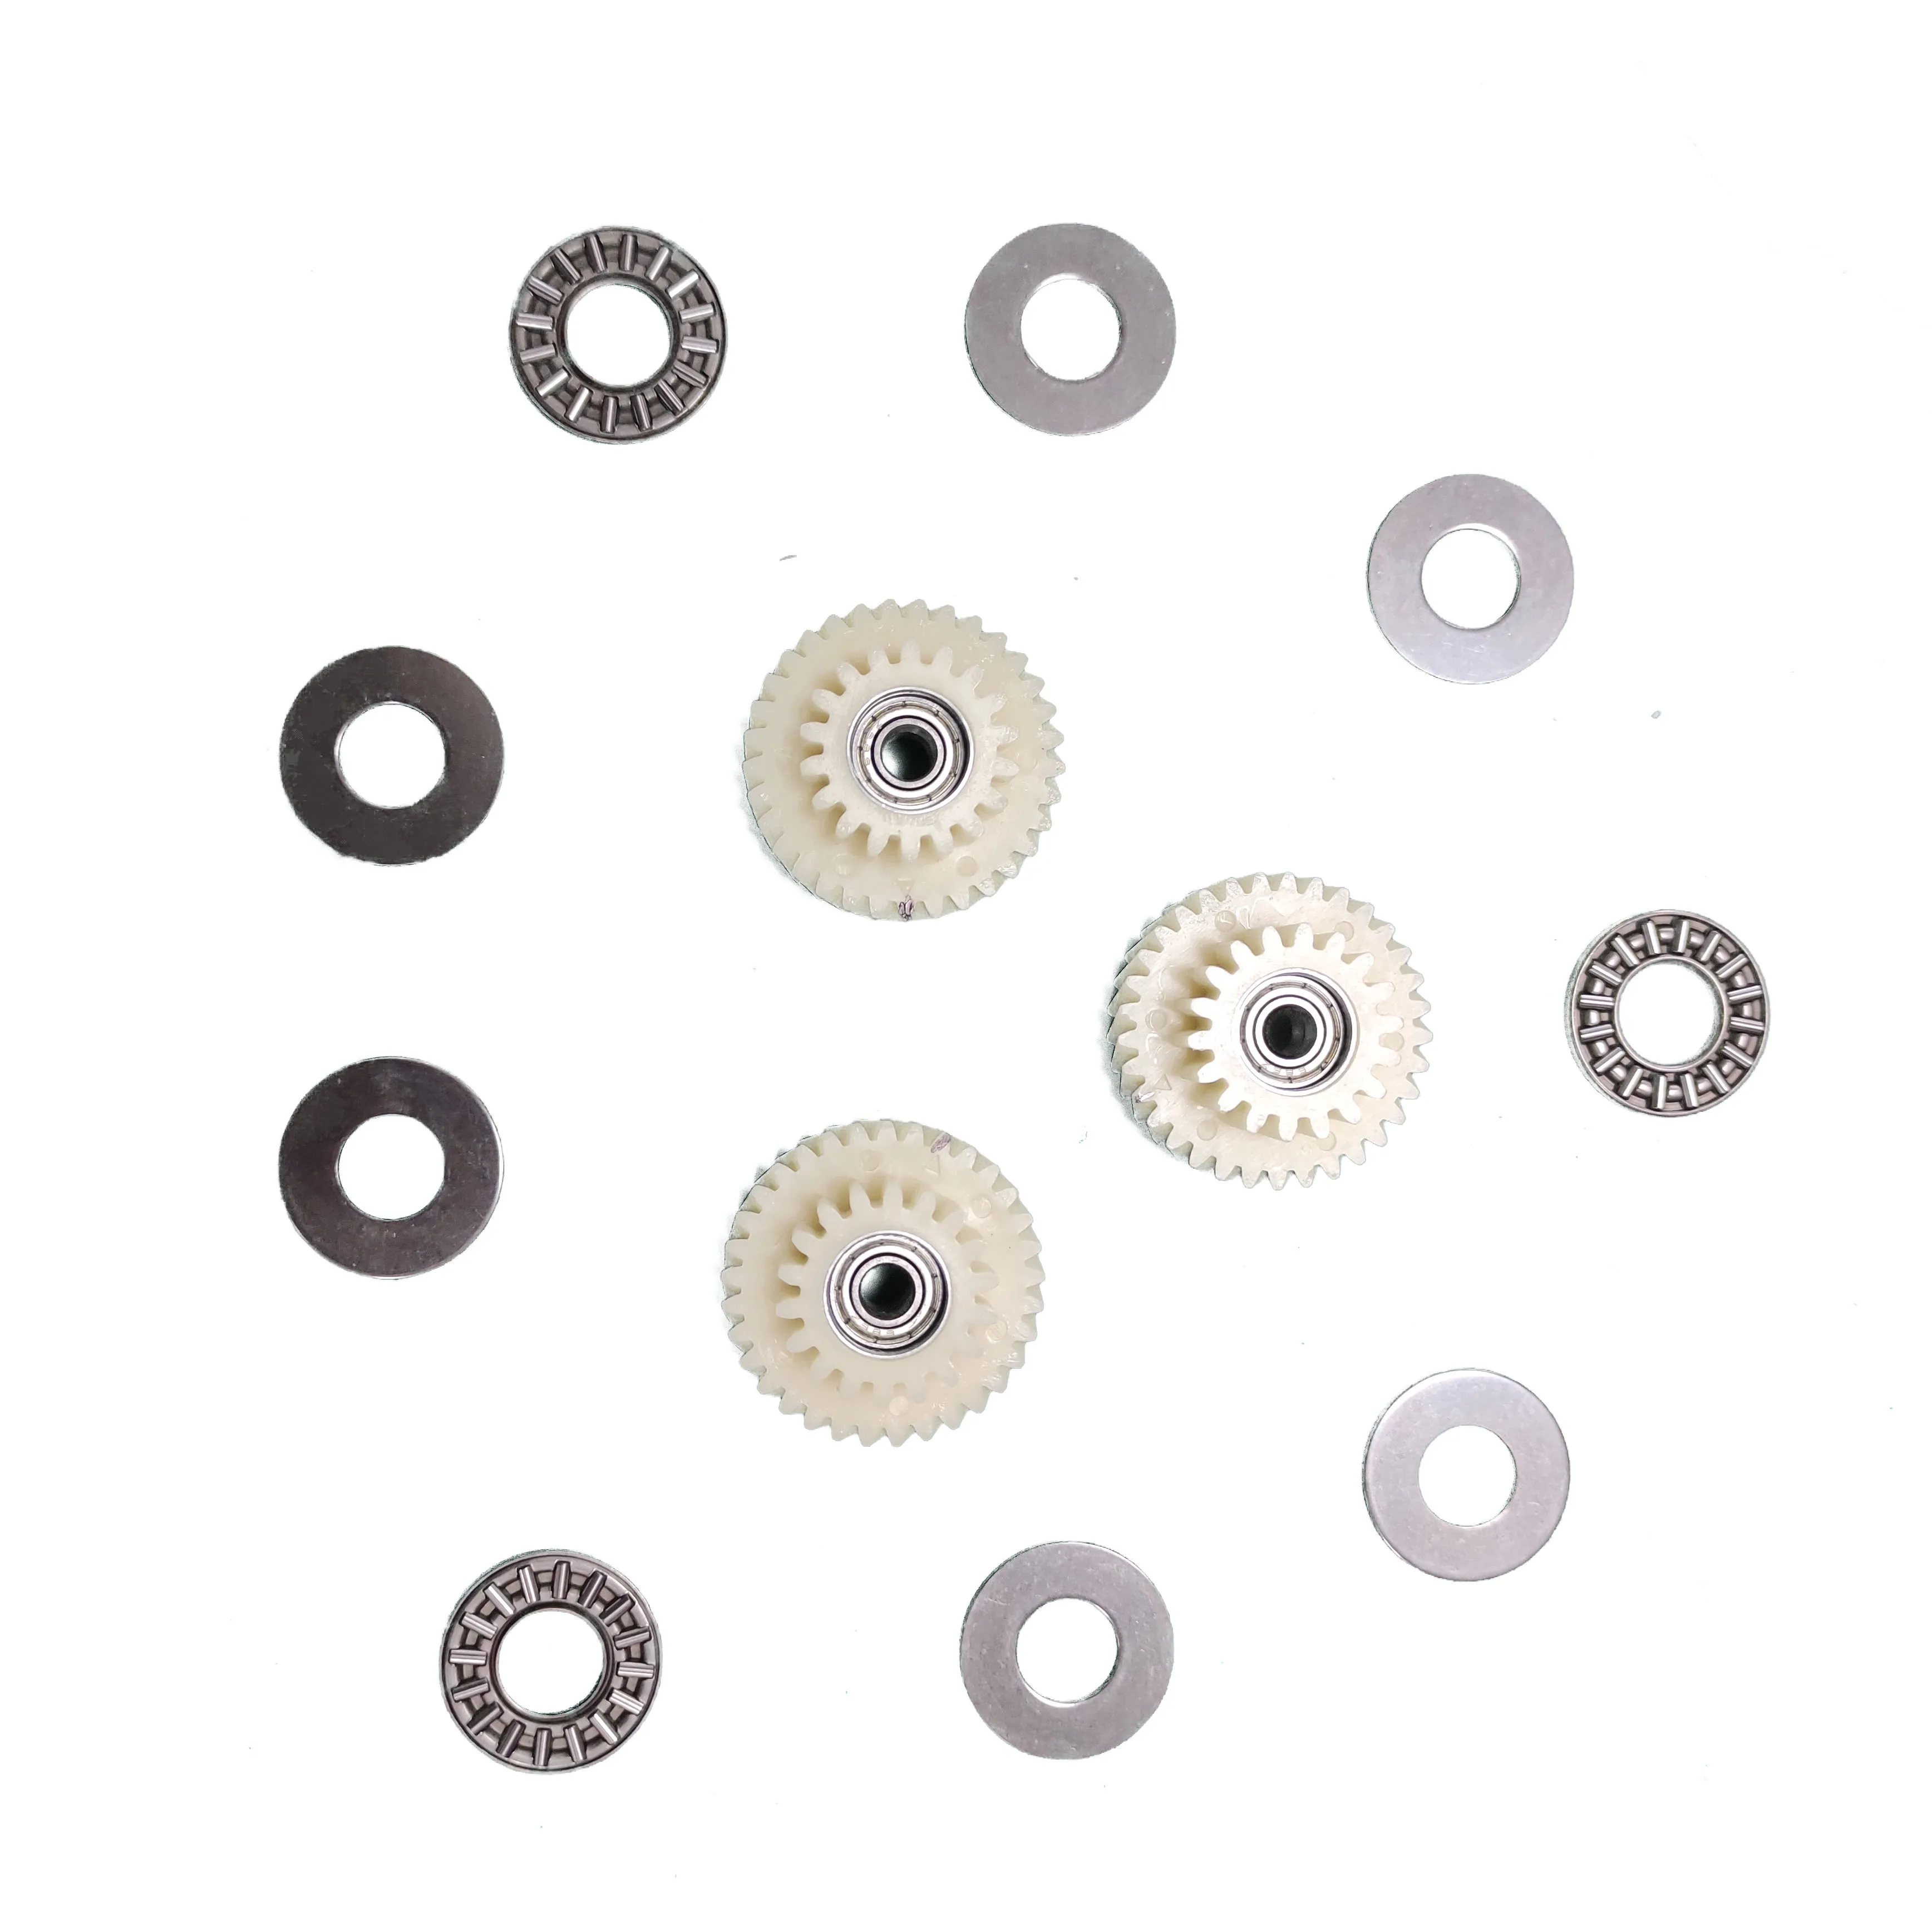 Bafang RM G310.250.DC Nylon Gear Set Spare Part for Replacement 18-33 Teeth Helical Plastic Pinion Gear